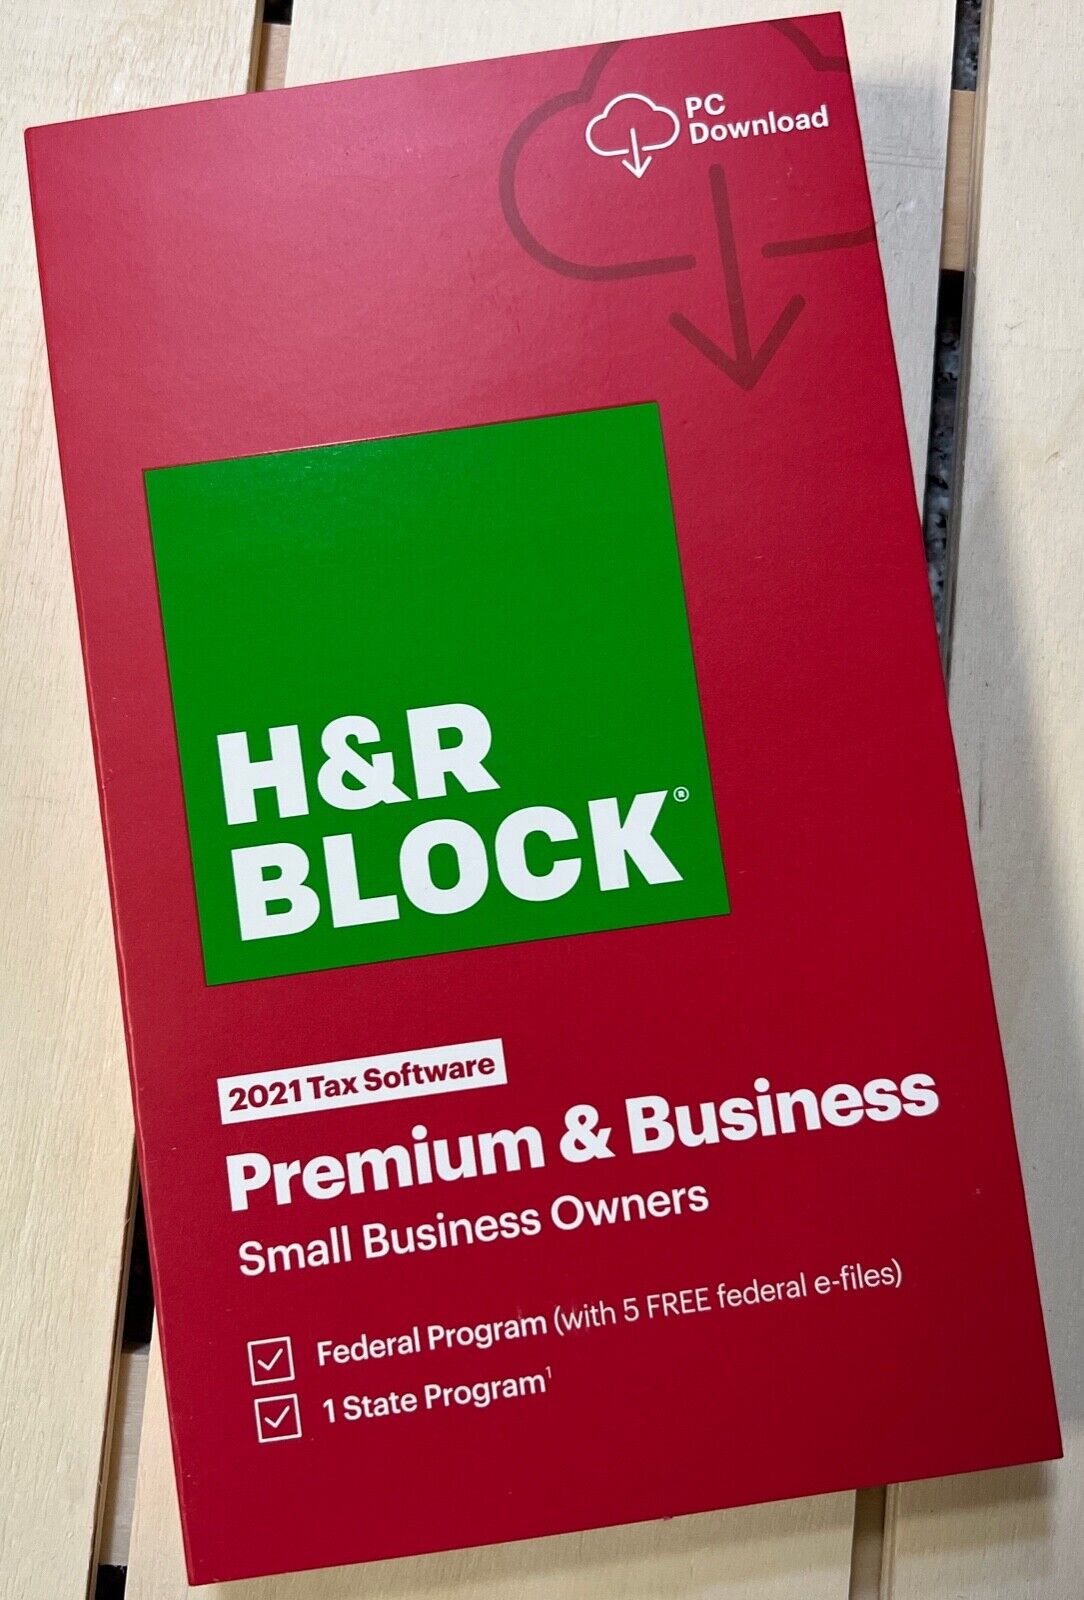 H&R BLOCK 2021 Tax Software Premium & Business 2021 (Windows ONLY) NEW & SEALED